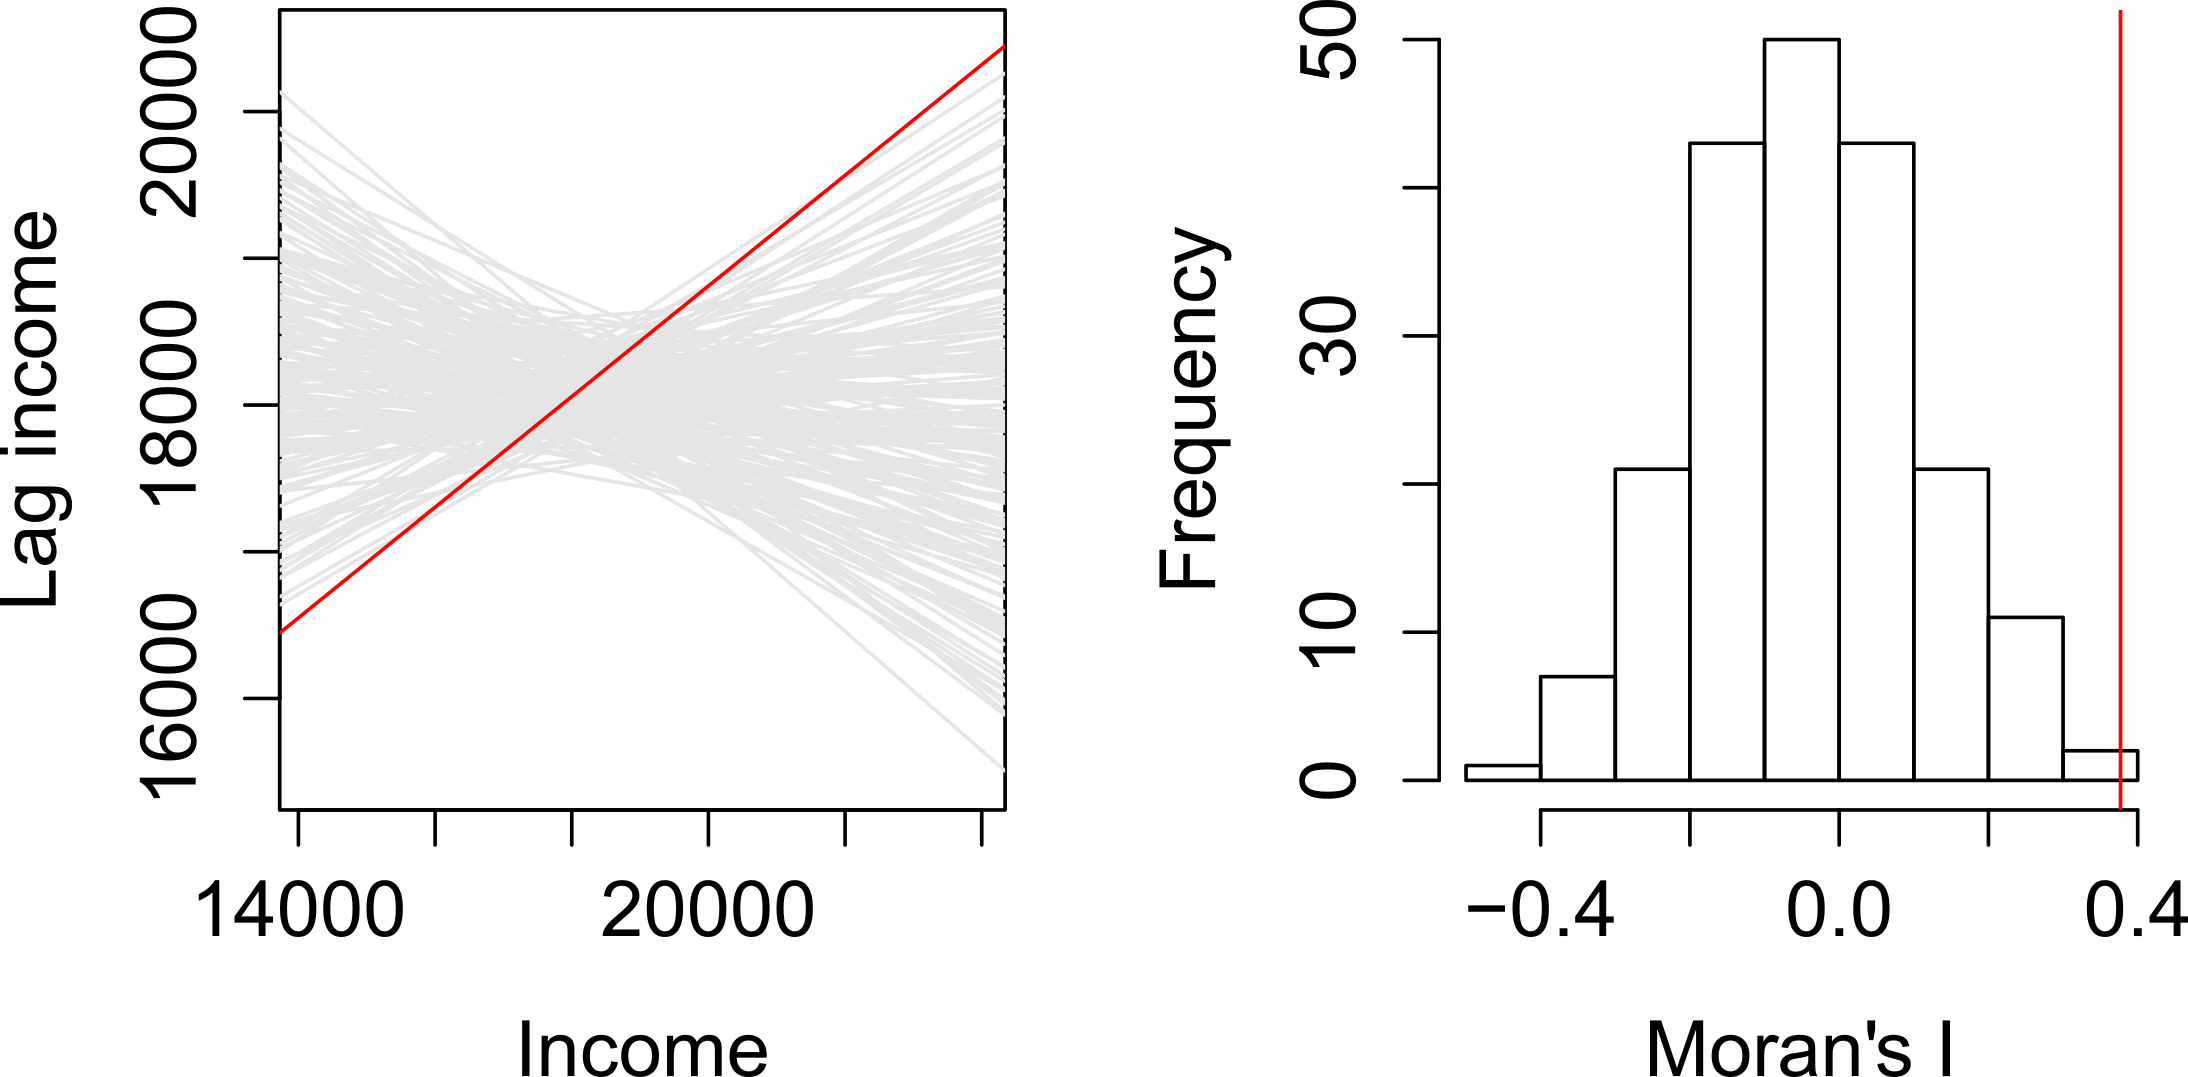 Results from 199 permutations. Left plot shows Moran's I slopes (in gray) from each random permutation of income values superimposed with the observed Moran's I slope (in red). Right plot shows the distribution of Moran's I values for all 199 permutations; red vertical line shows our observed Moran's I value of 0.377.